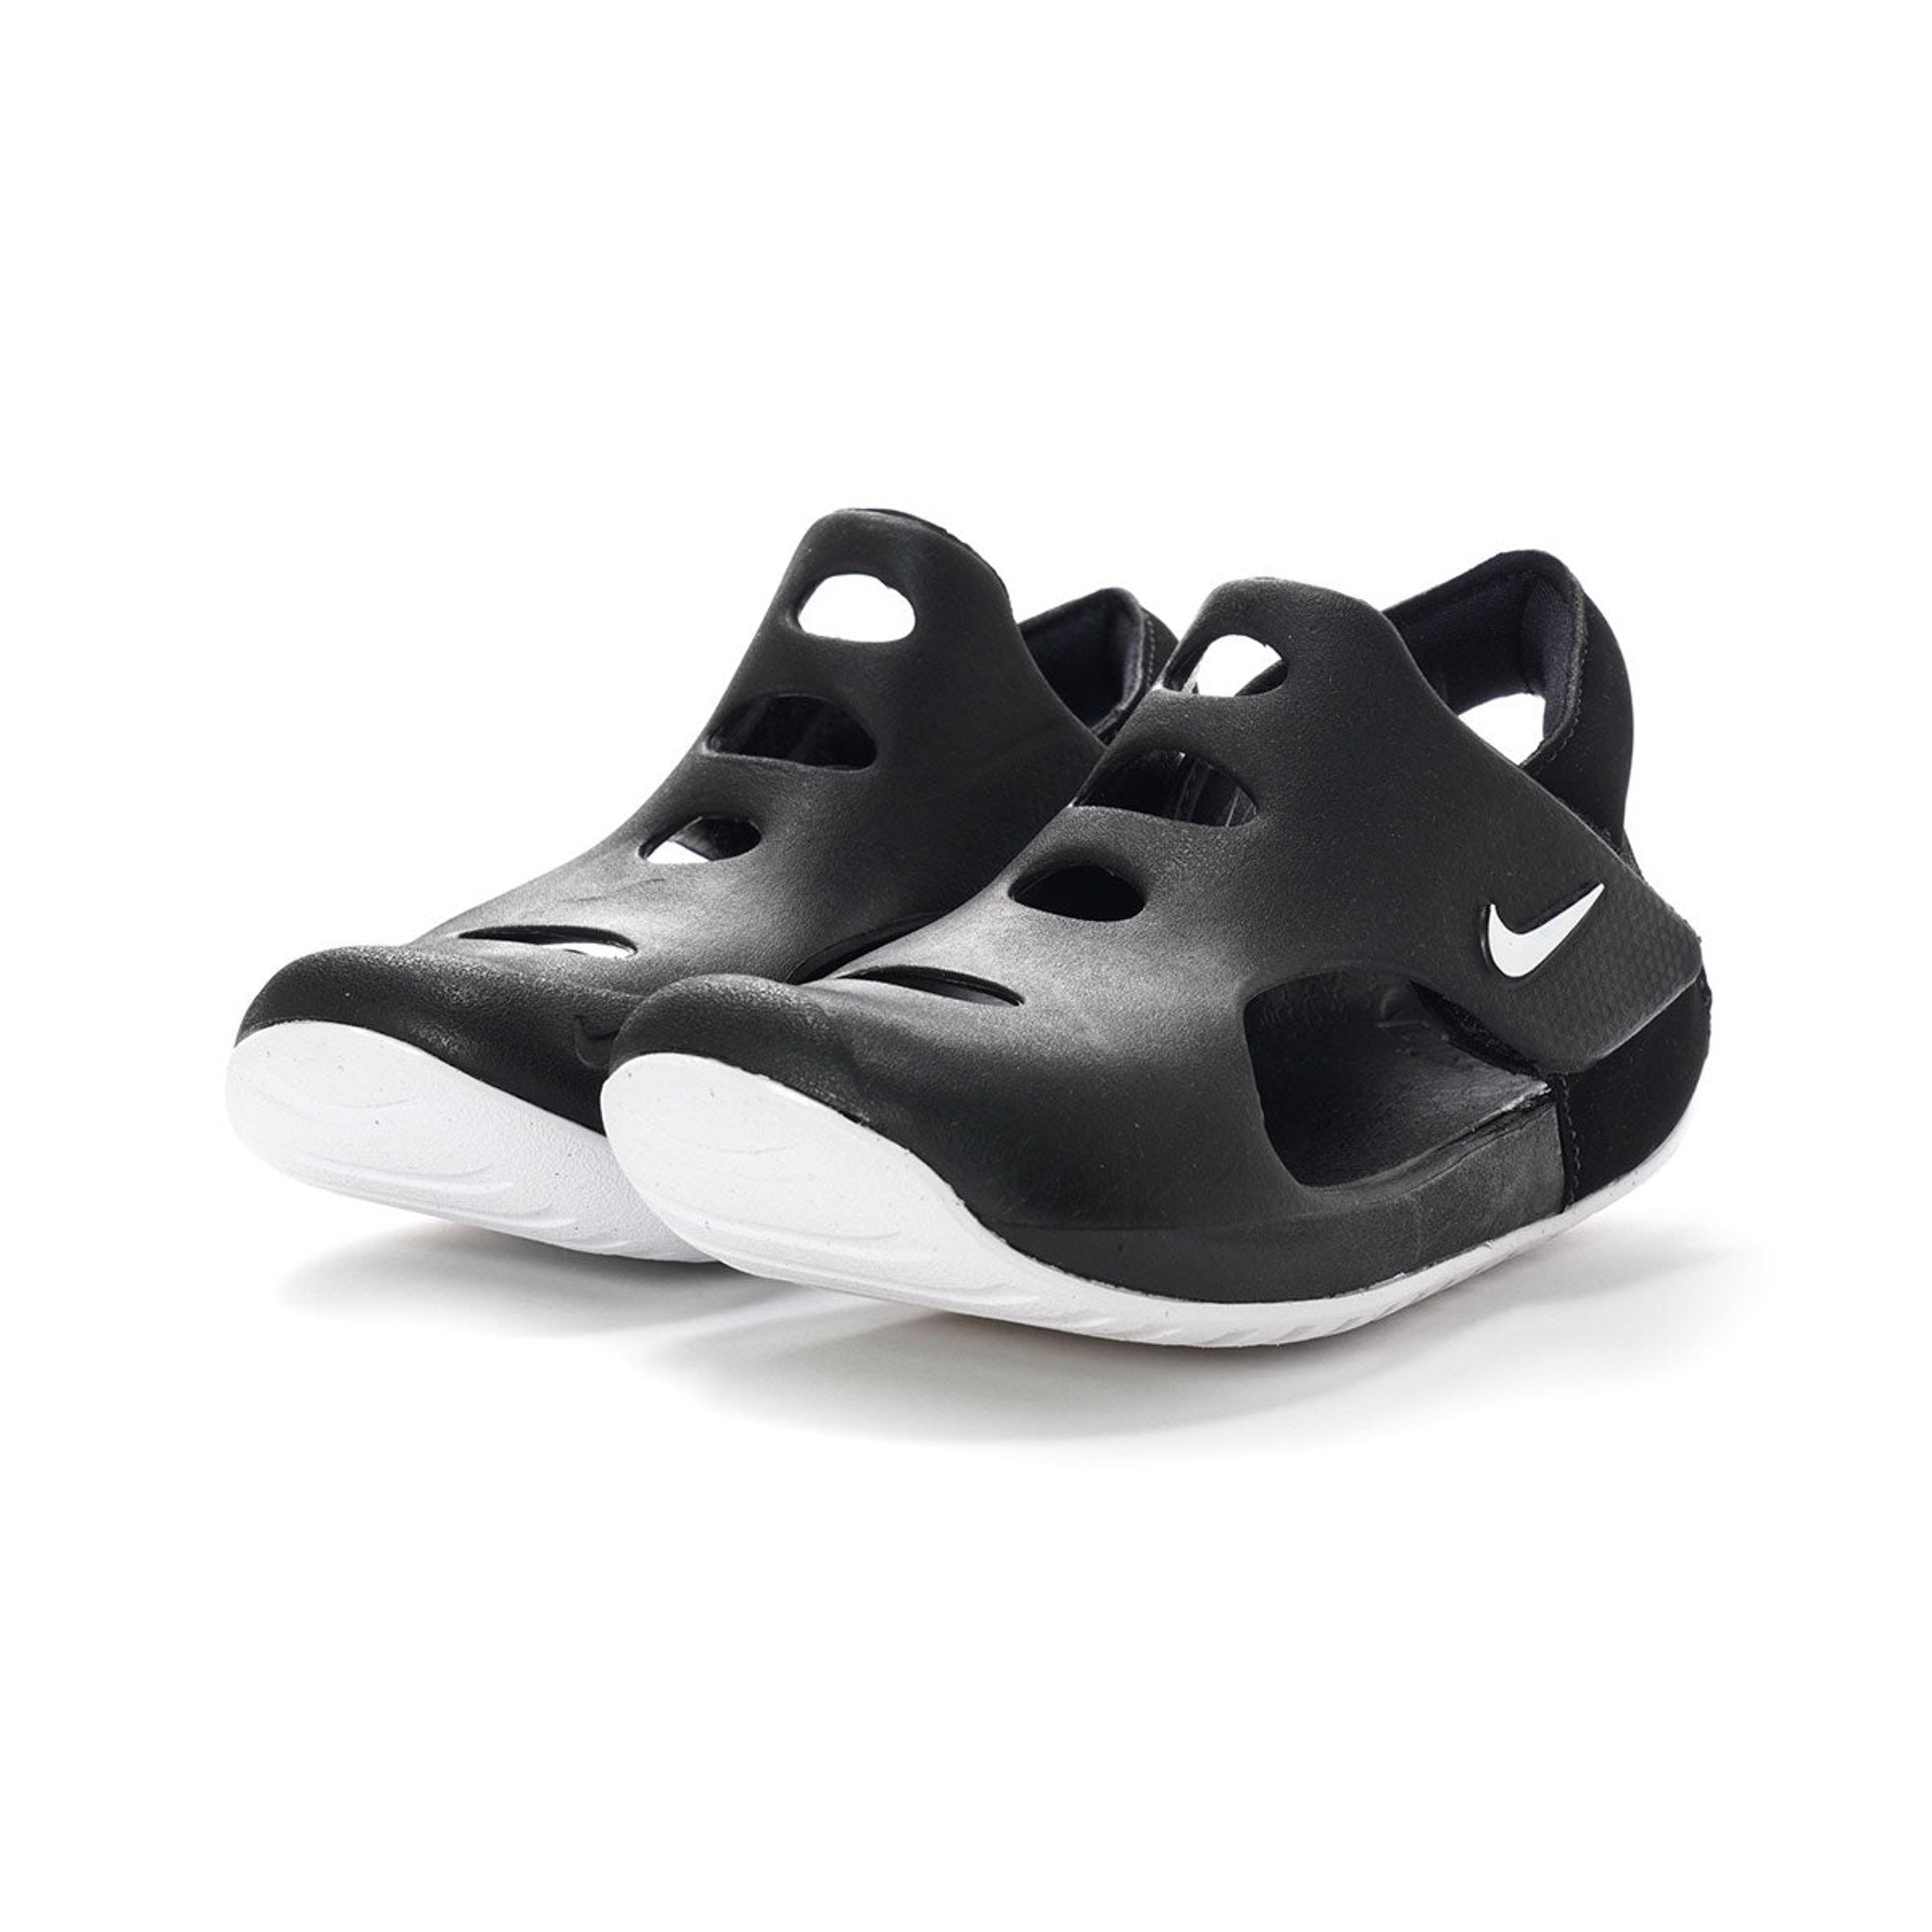 Alternate View 4 of Nike Kids Sunray Protect 3 Sandals